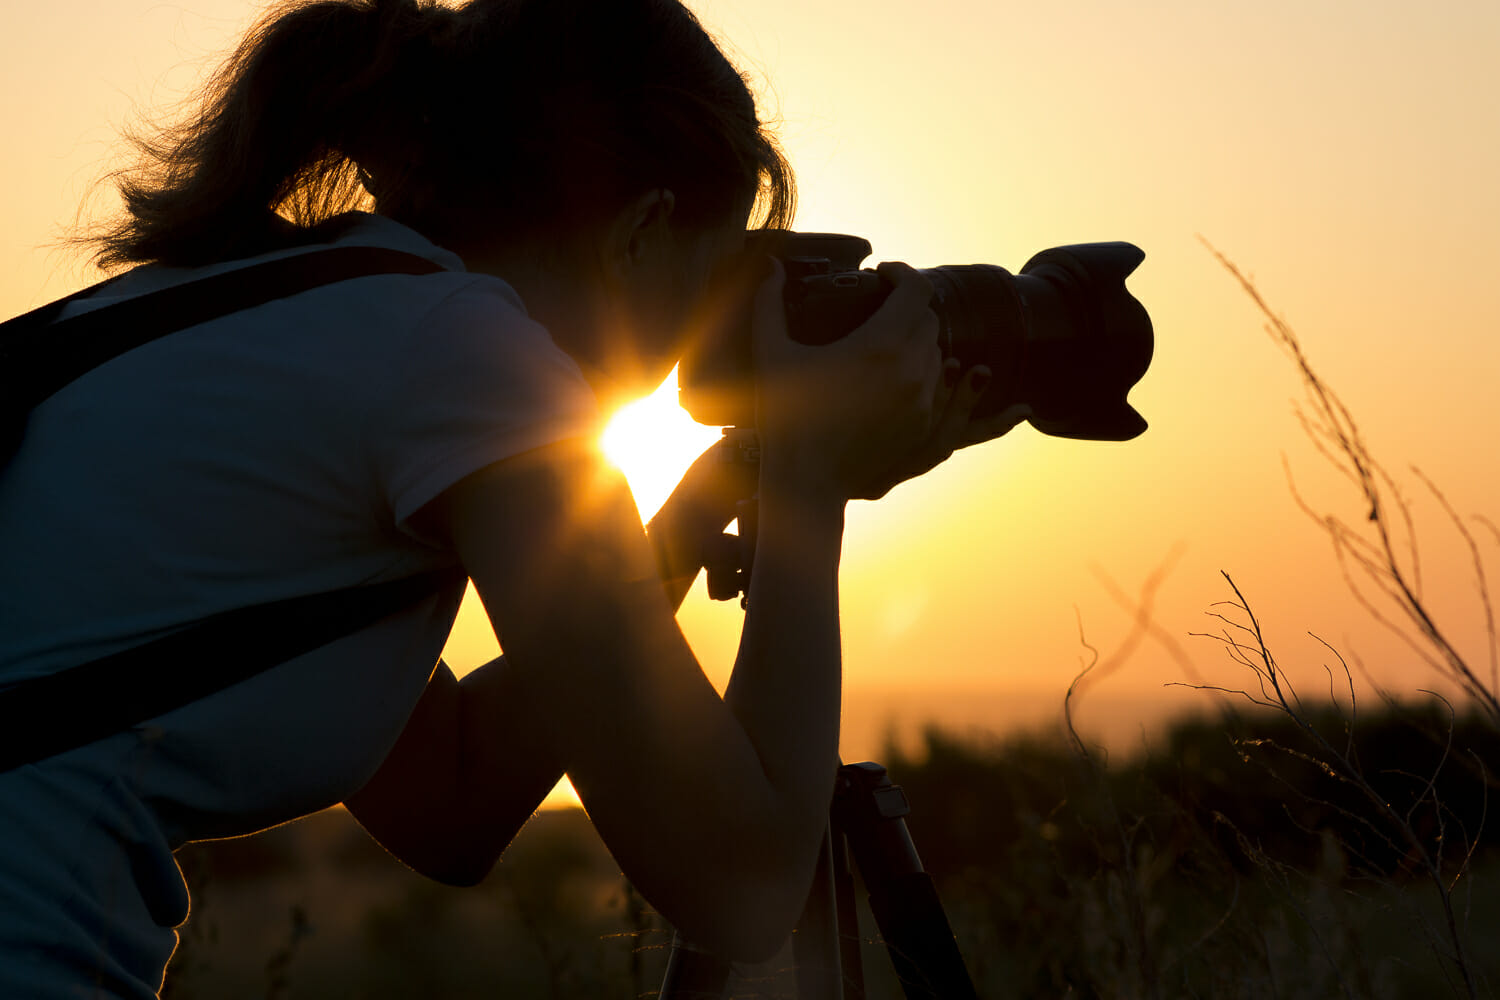 Woman photographing landscape at sunset